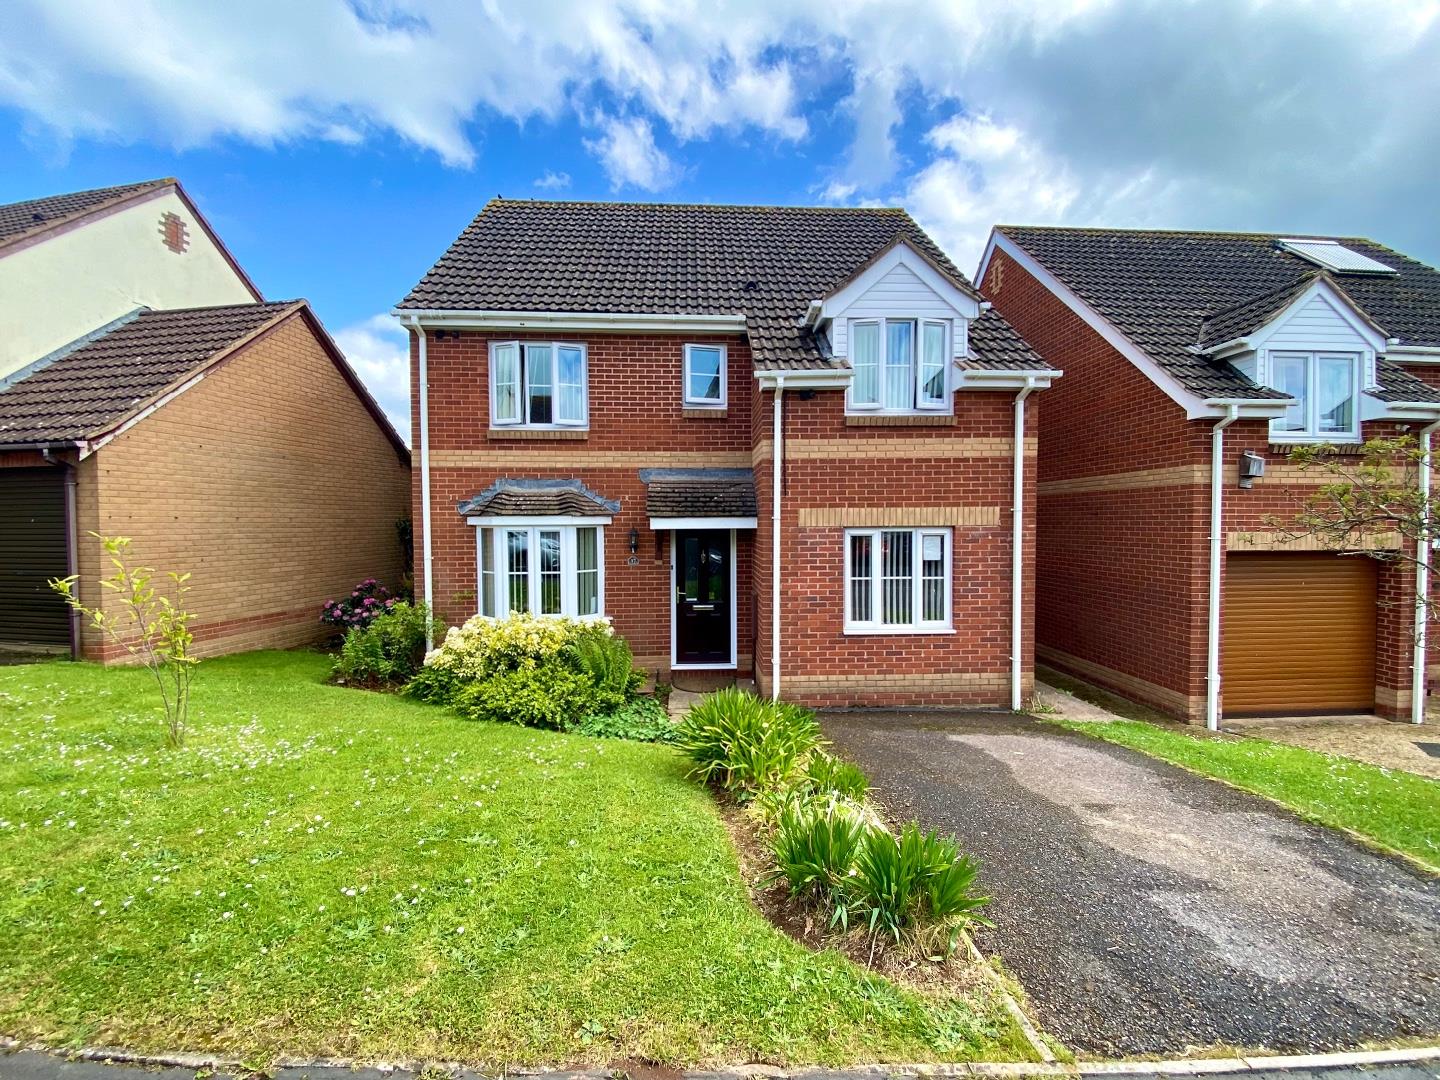 4 bed detached house for sale in Chaffinch Drive, Cullompton, Devon EX15 - Zoopla